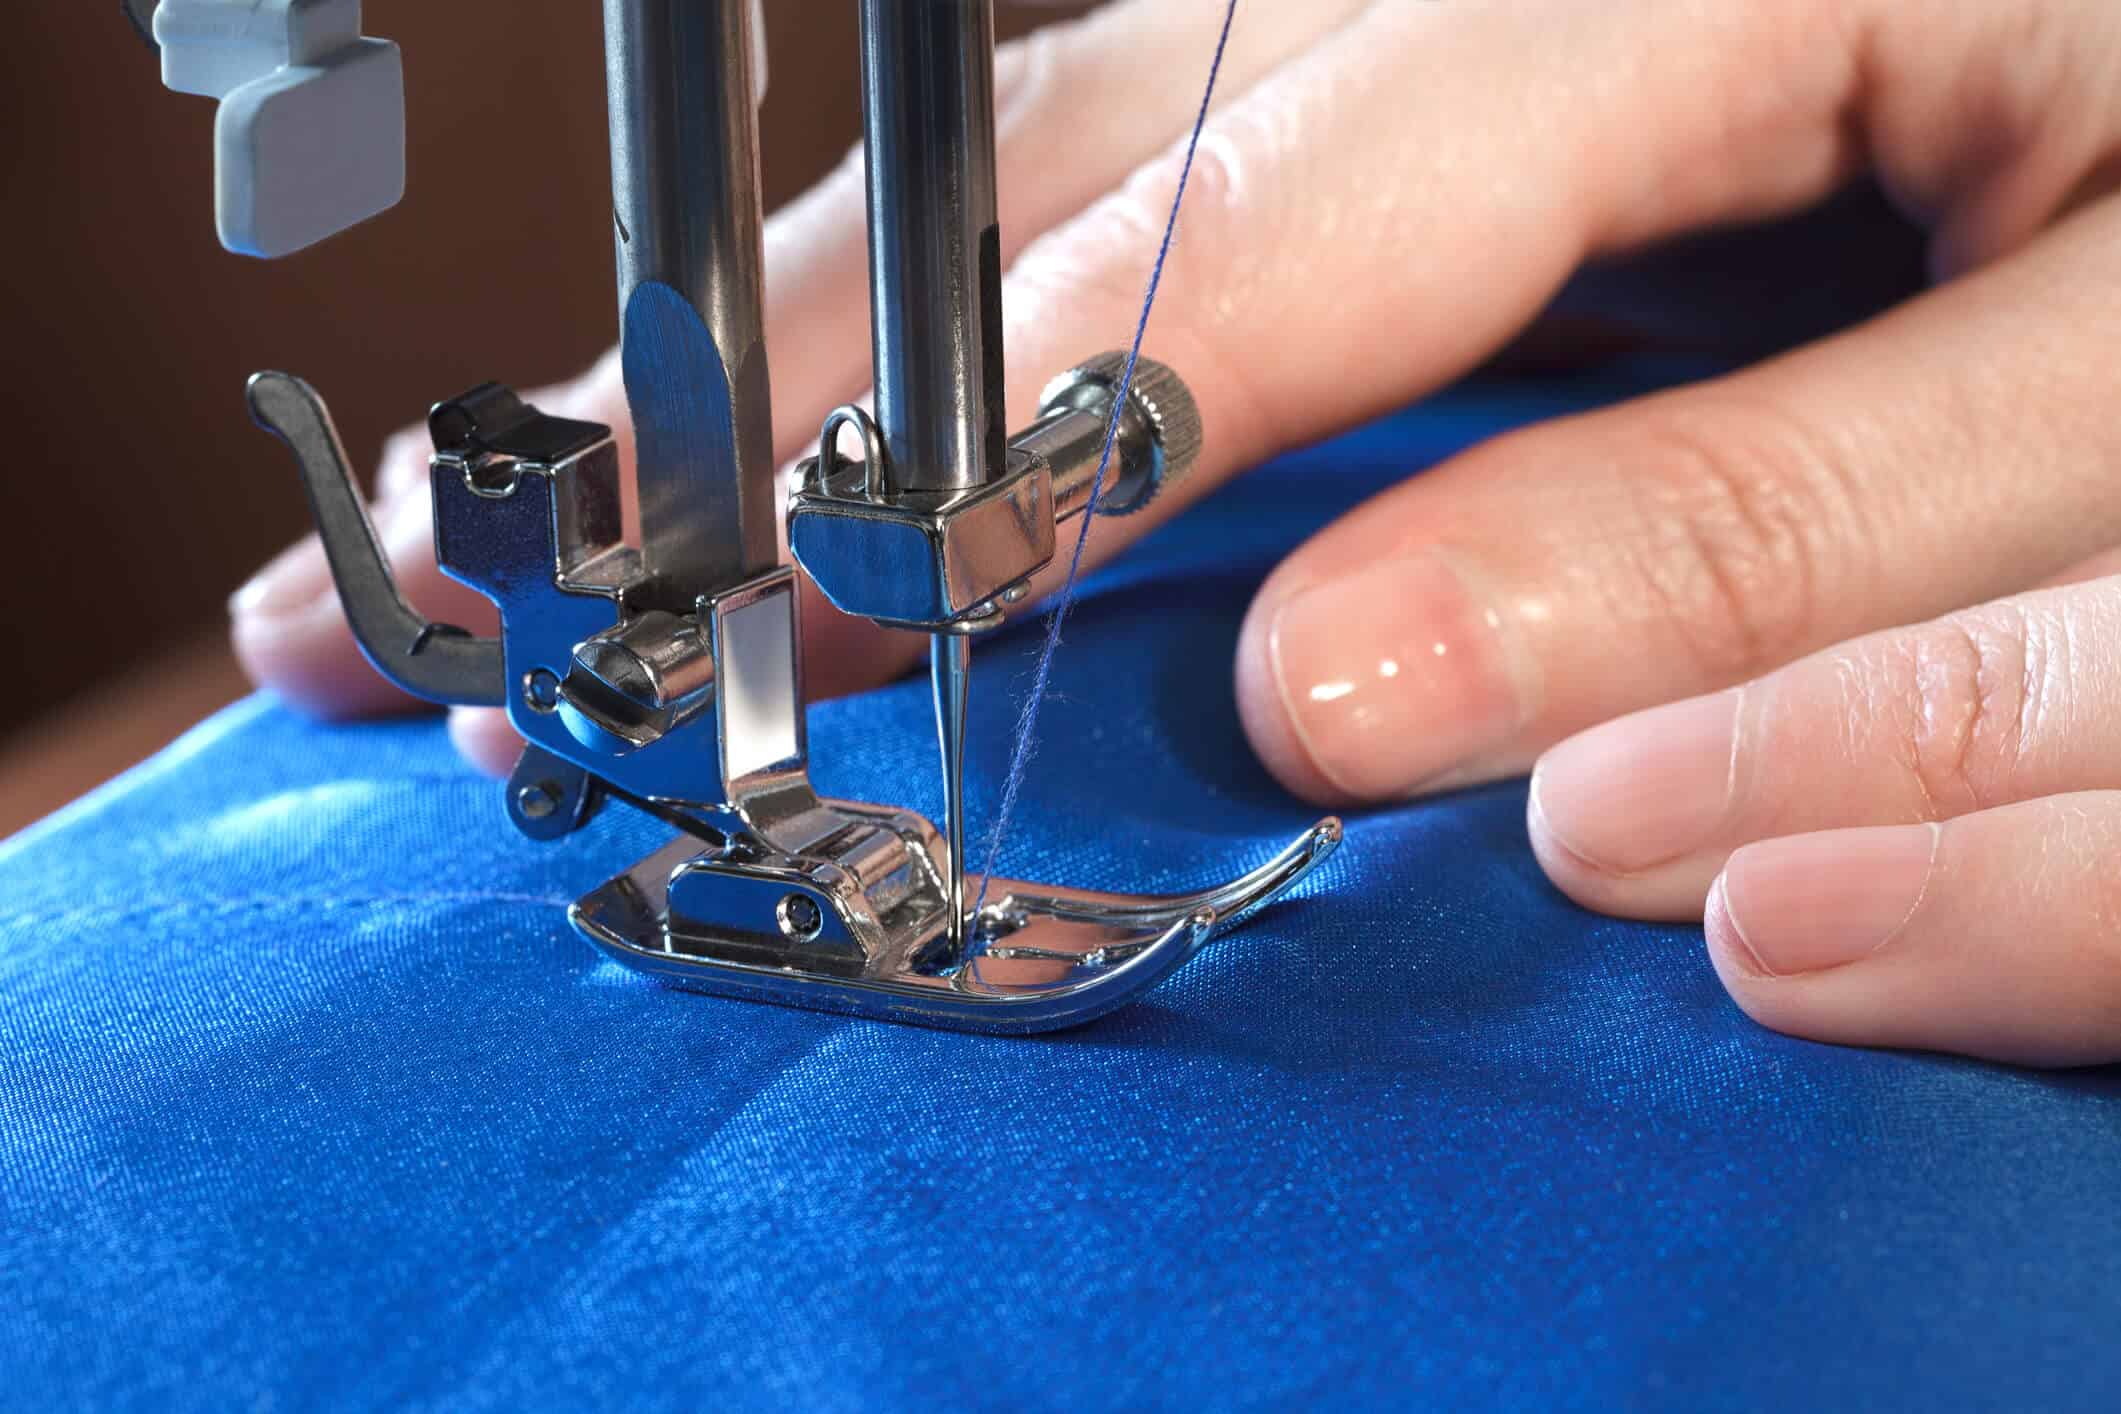 How Sewing Machines Work